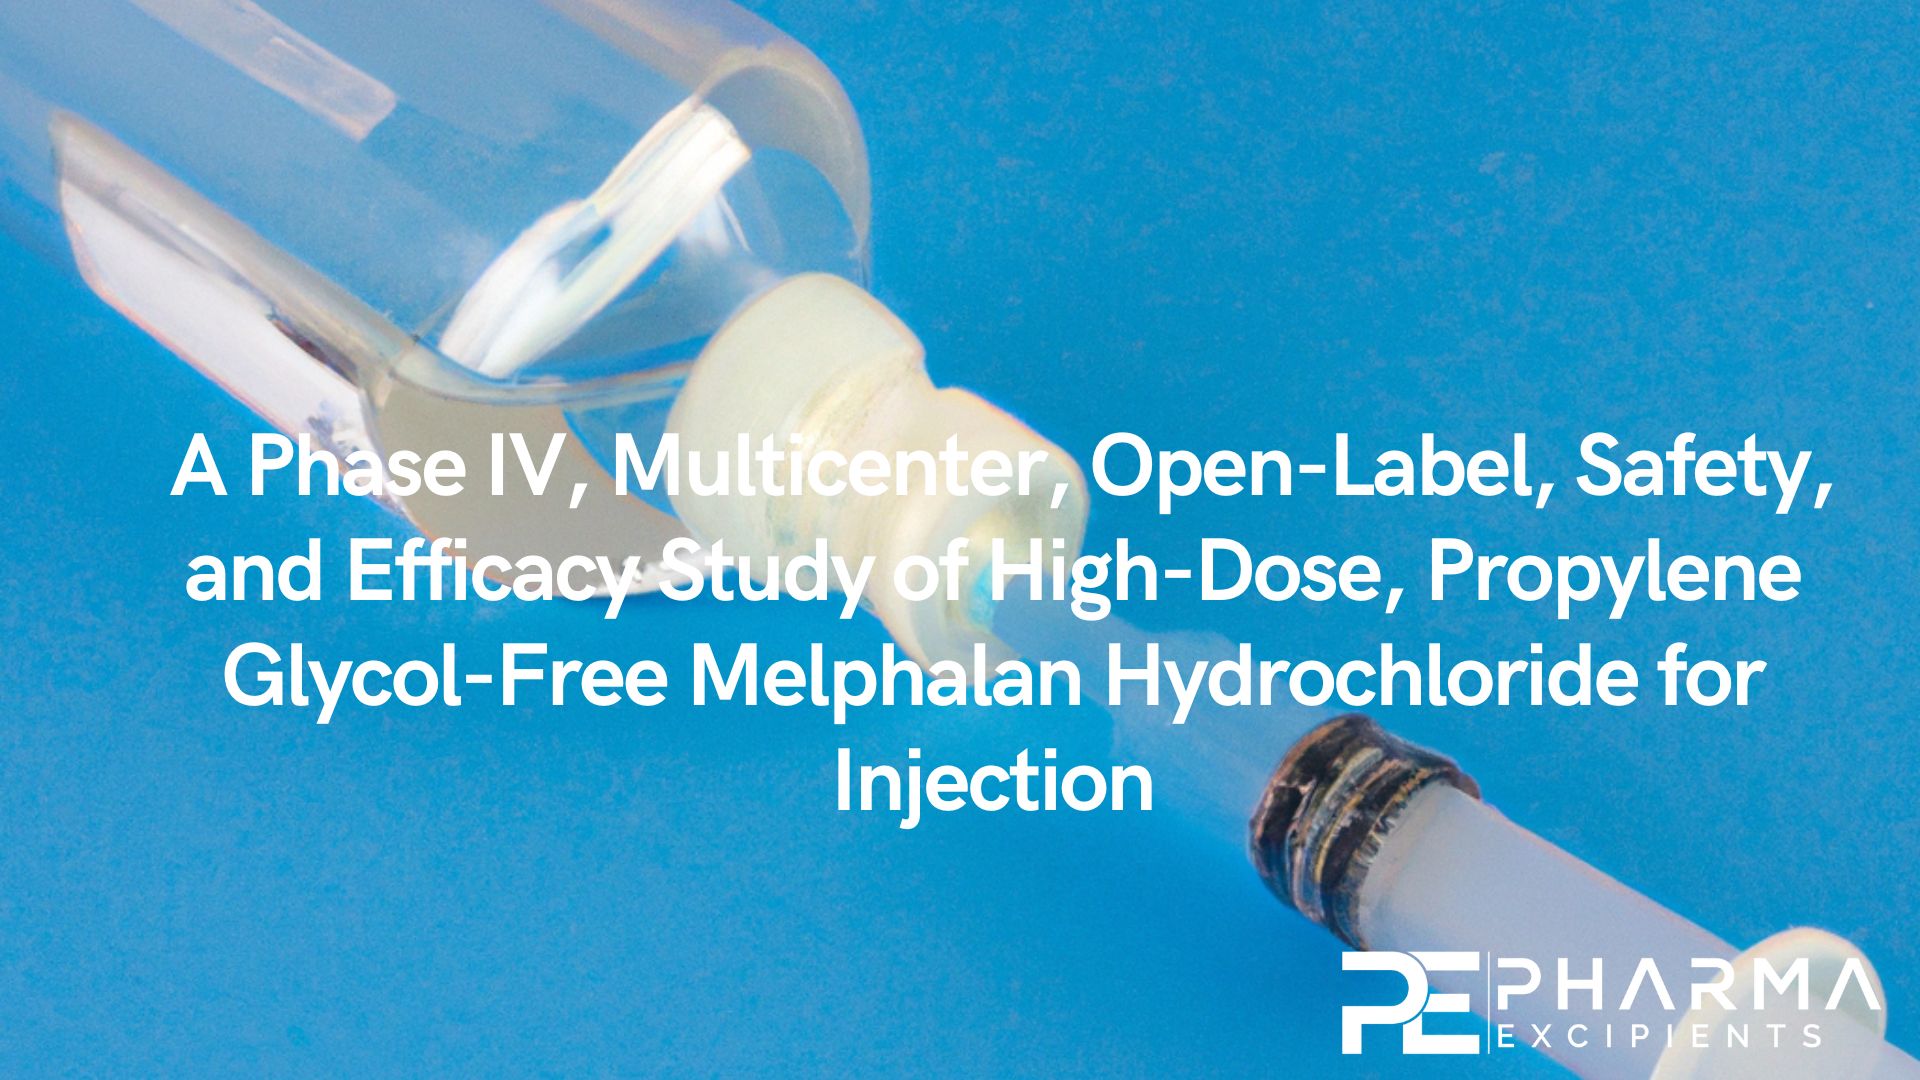 A Phase IV, Multicenter, Open-Label, Safety, and Efficacy Study of High-Dose, Propylene Glycol-Free Melphalan Hydrochloride for Injection (EVOMELA) As a Myeloablative Conditioning Regimen in Chinese Multiple Myeloma Patients Undergoing Autologous Stem Cell Transplantation